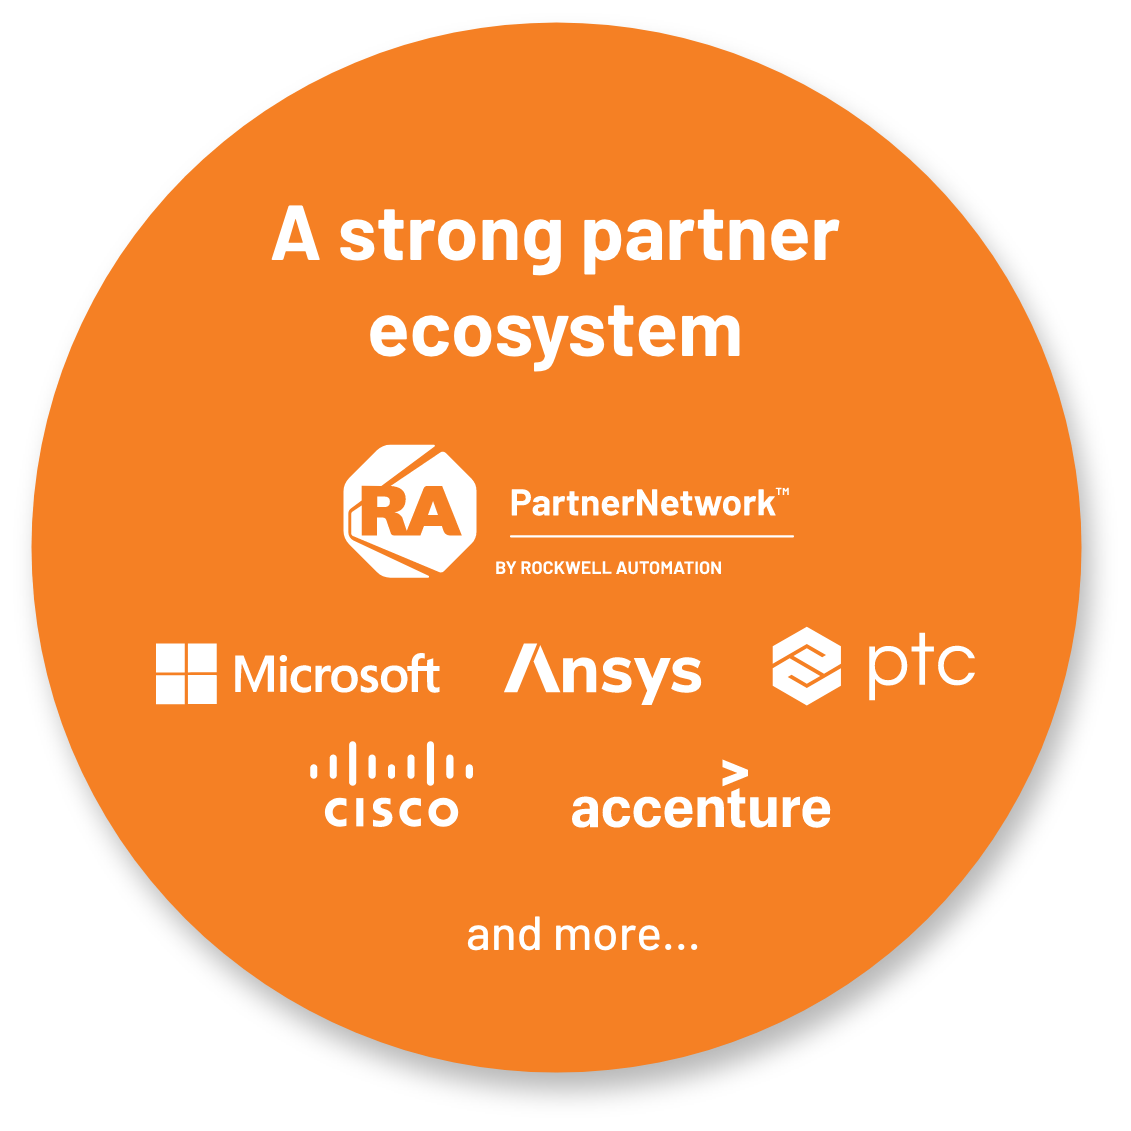 A strong partner ecosystem.